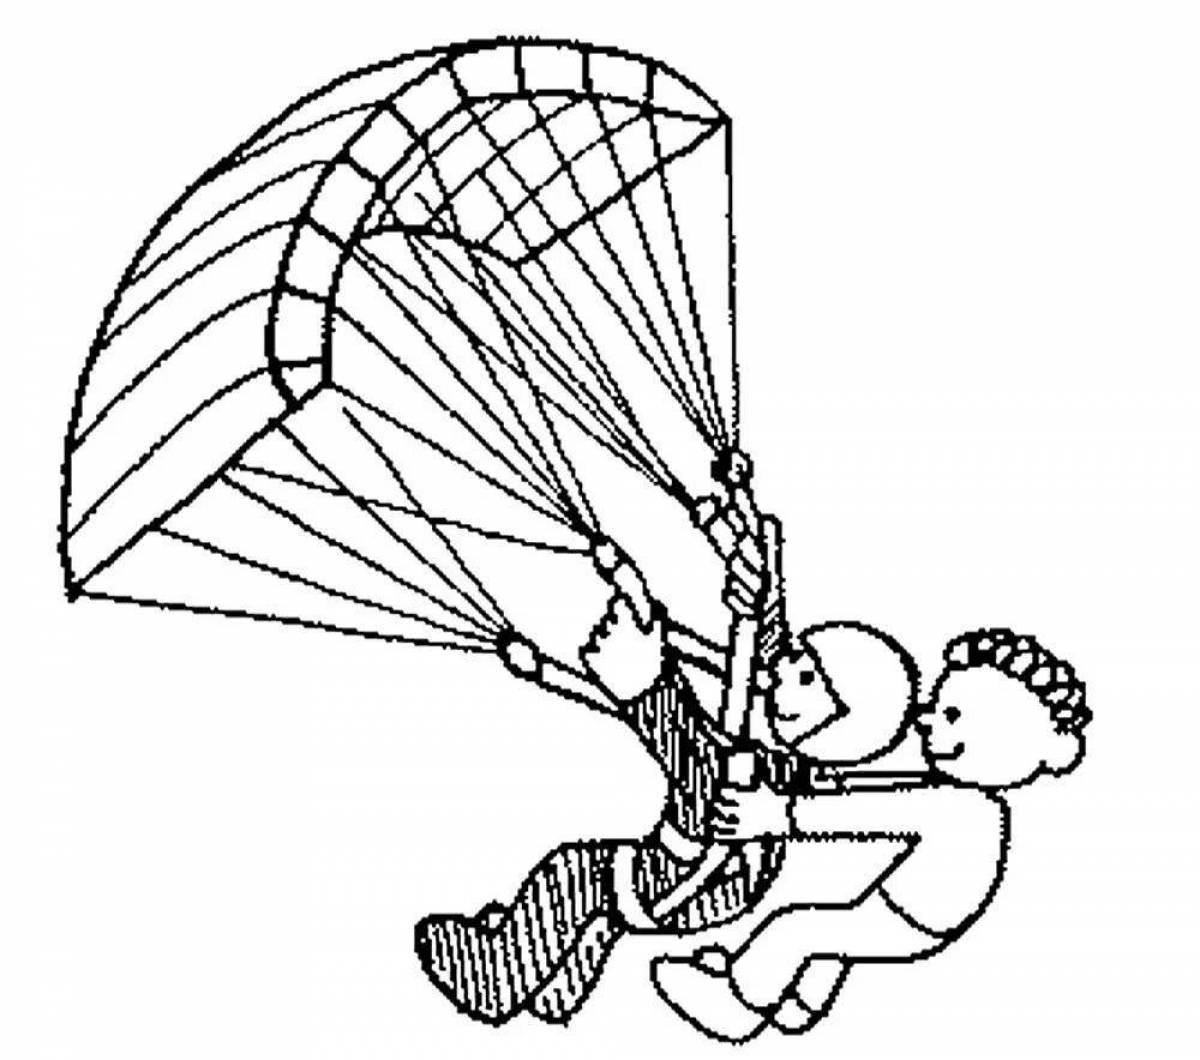 Coloring book with a parachute for the little ones